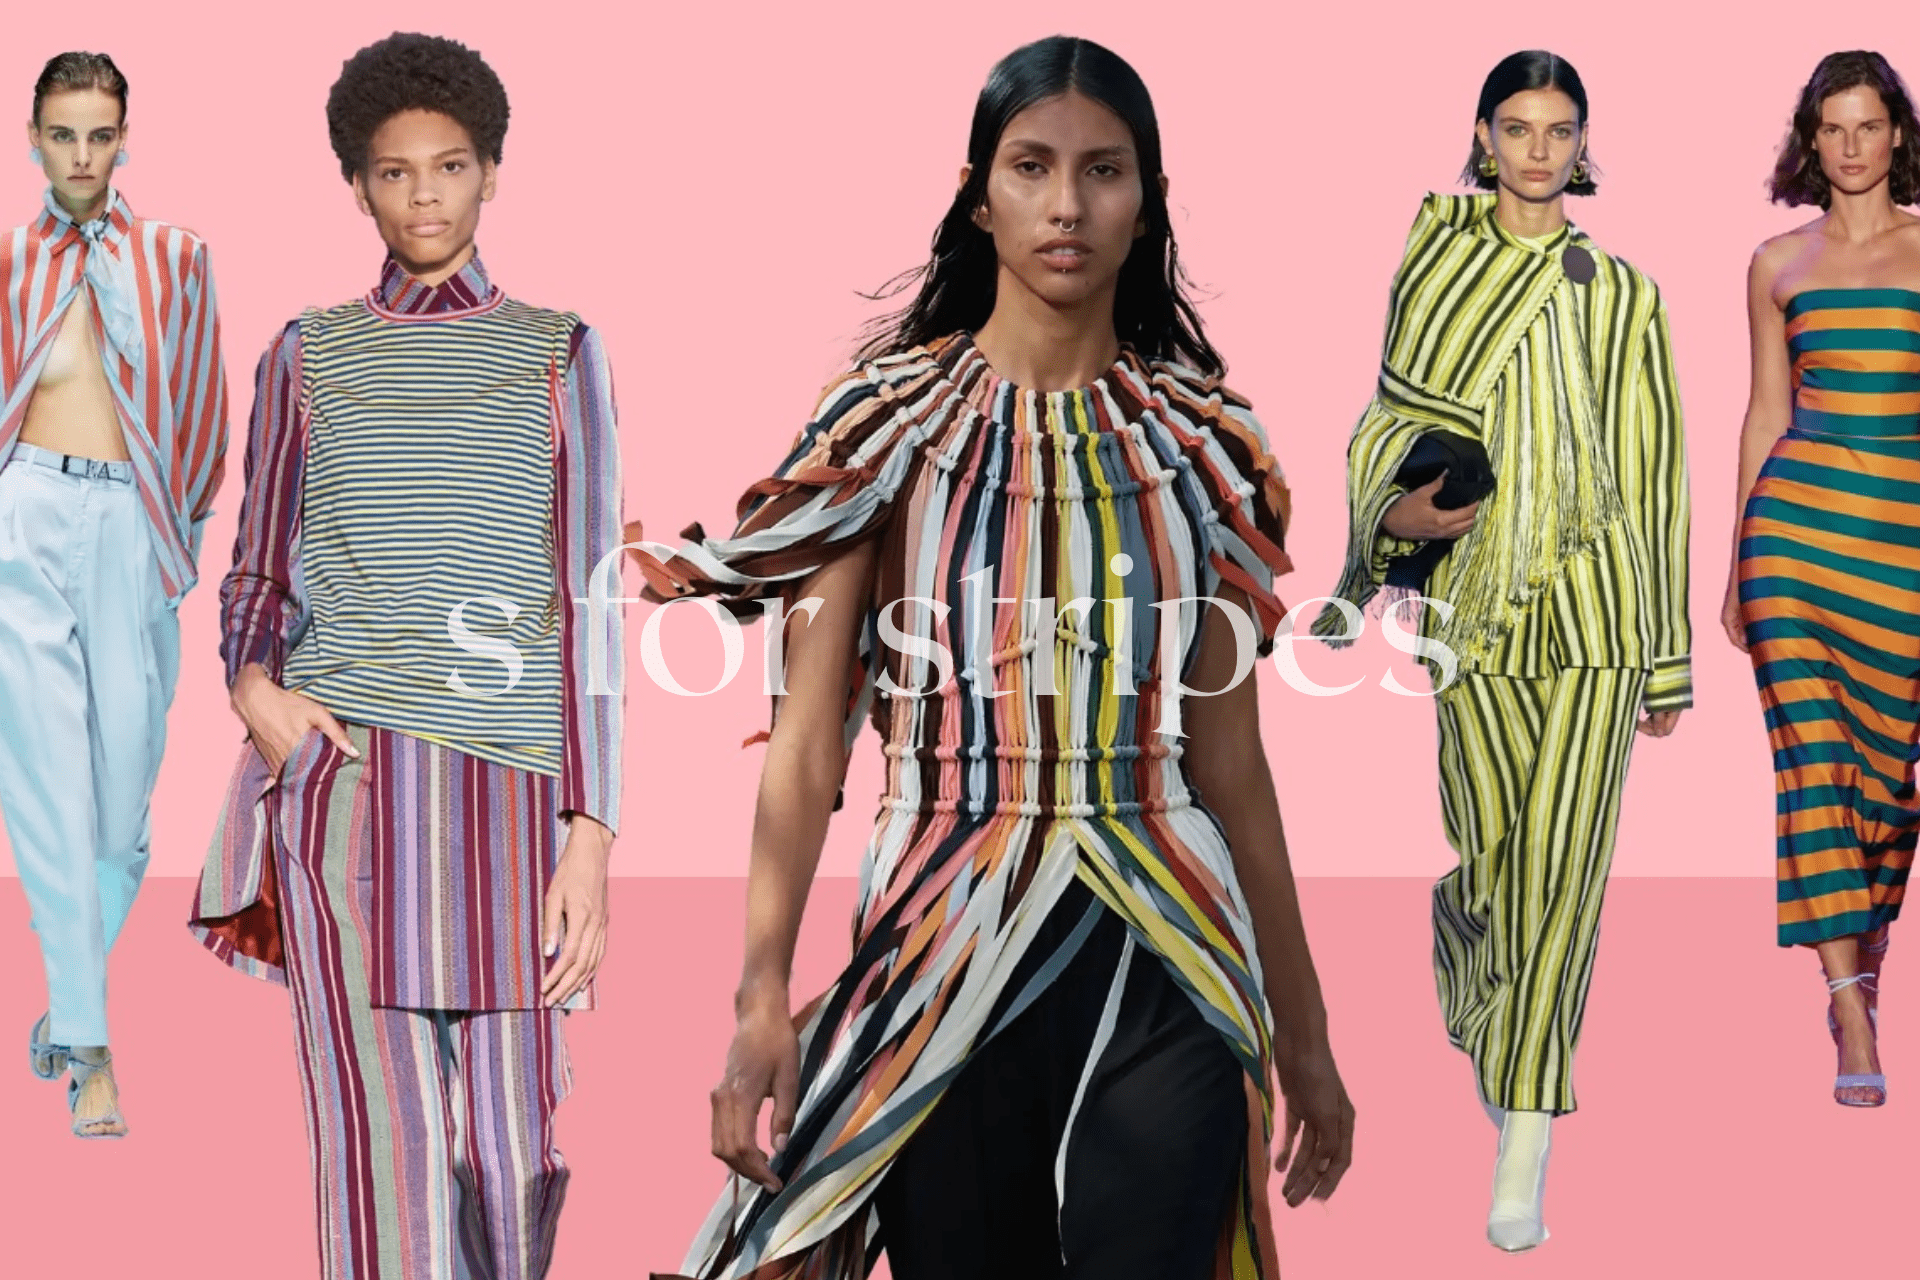 S for Stripes: The hot tips that will take off your image all day long